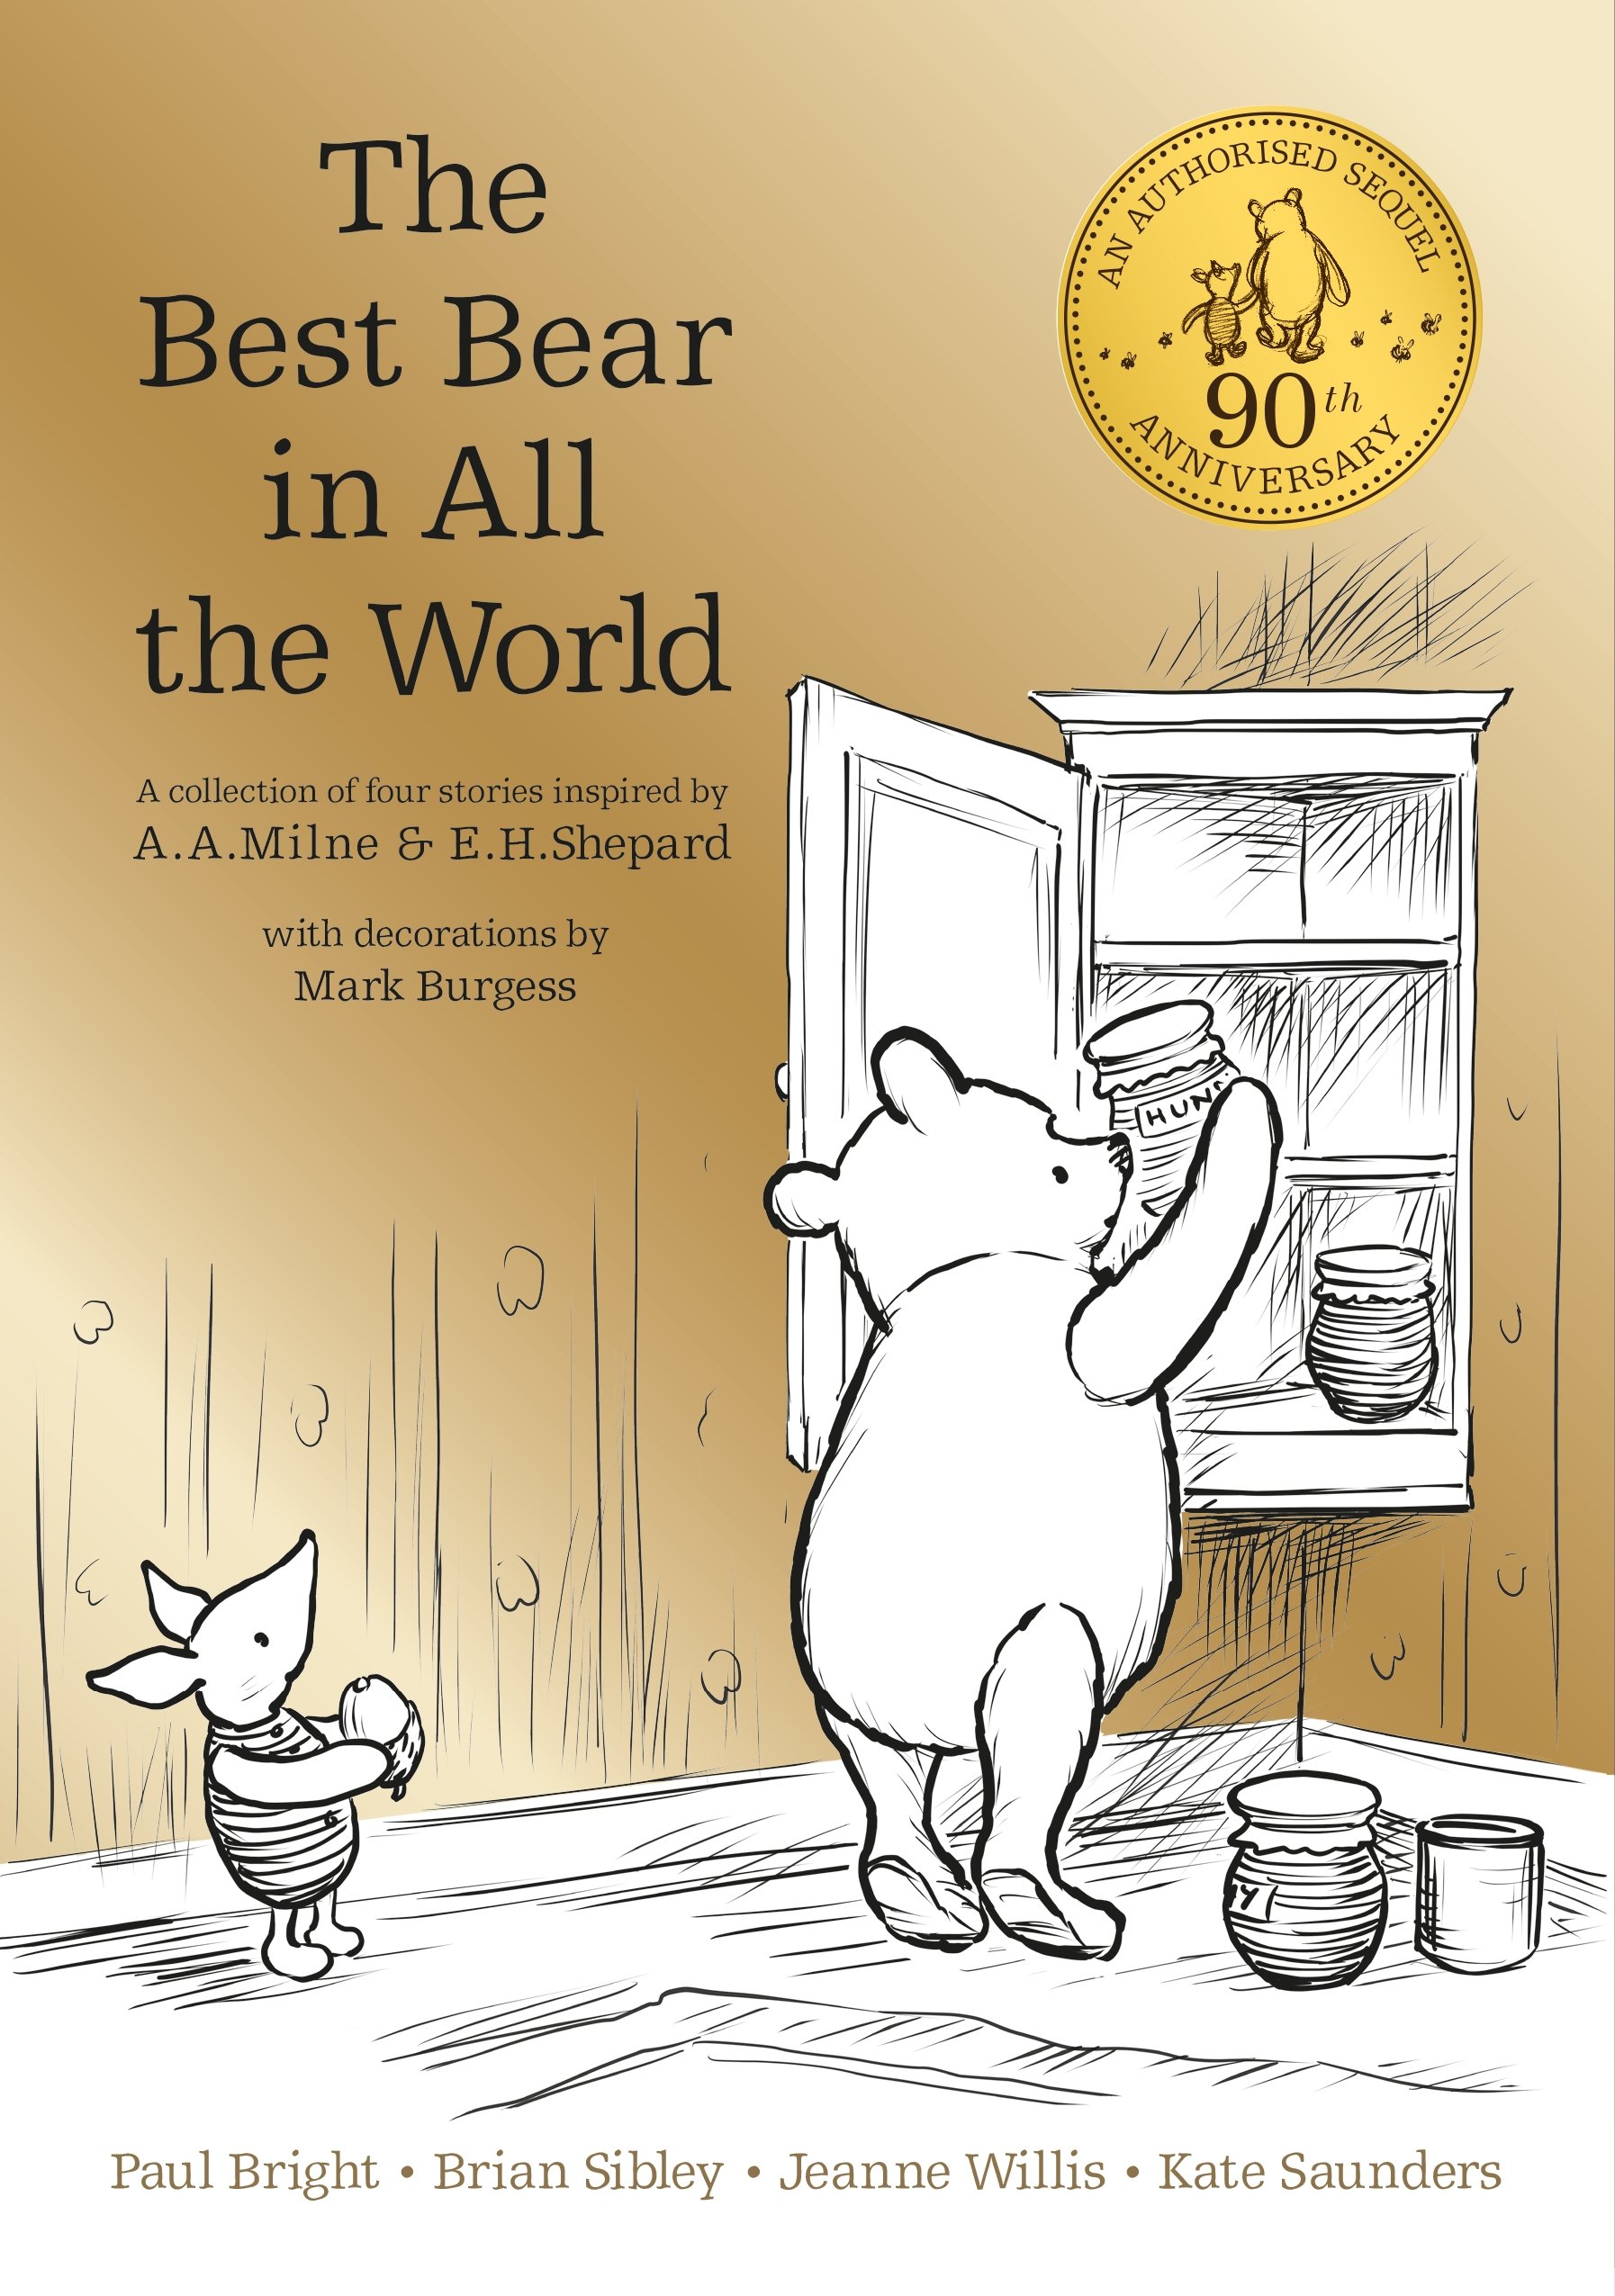 Winnie-the-Pooh - The Best Bear in All the World